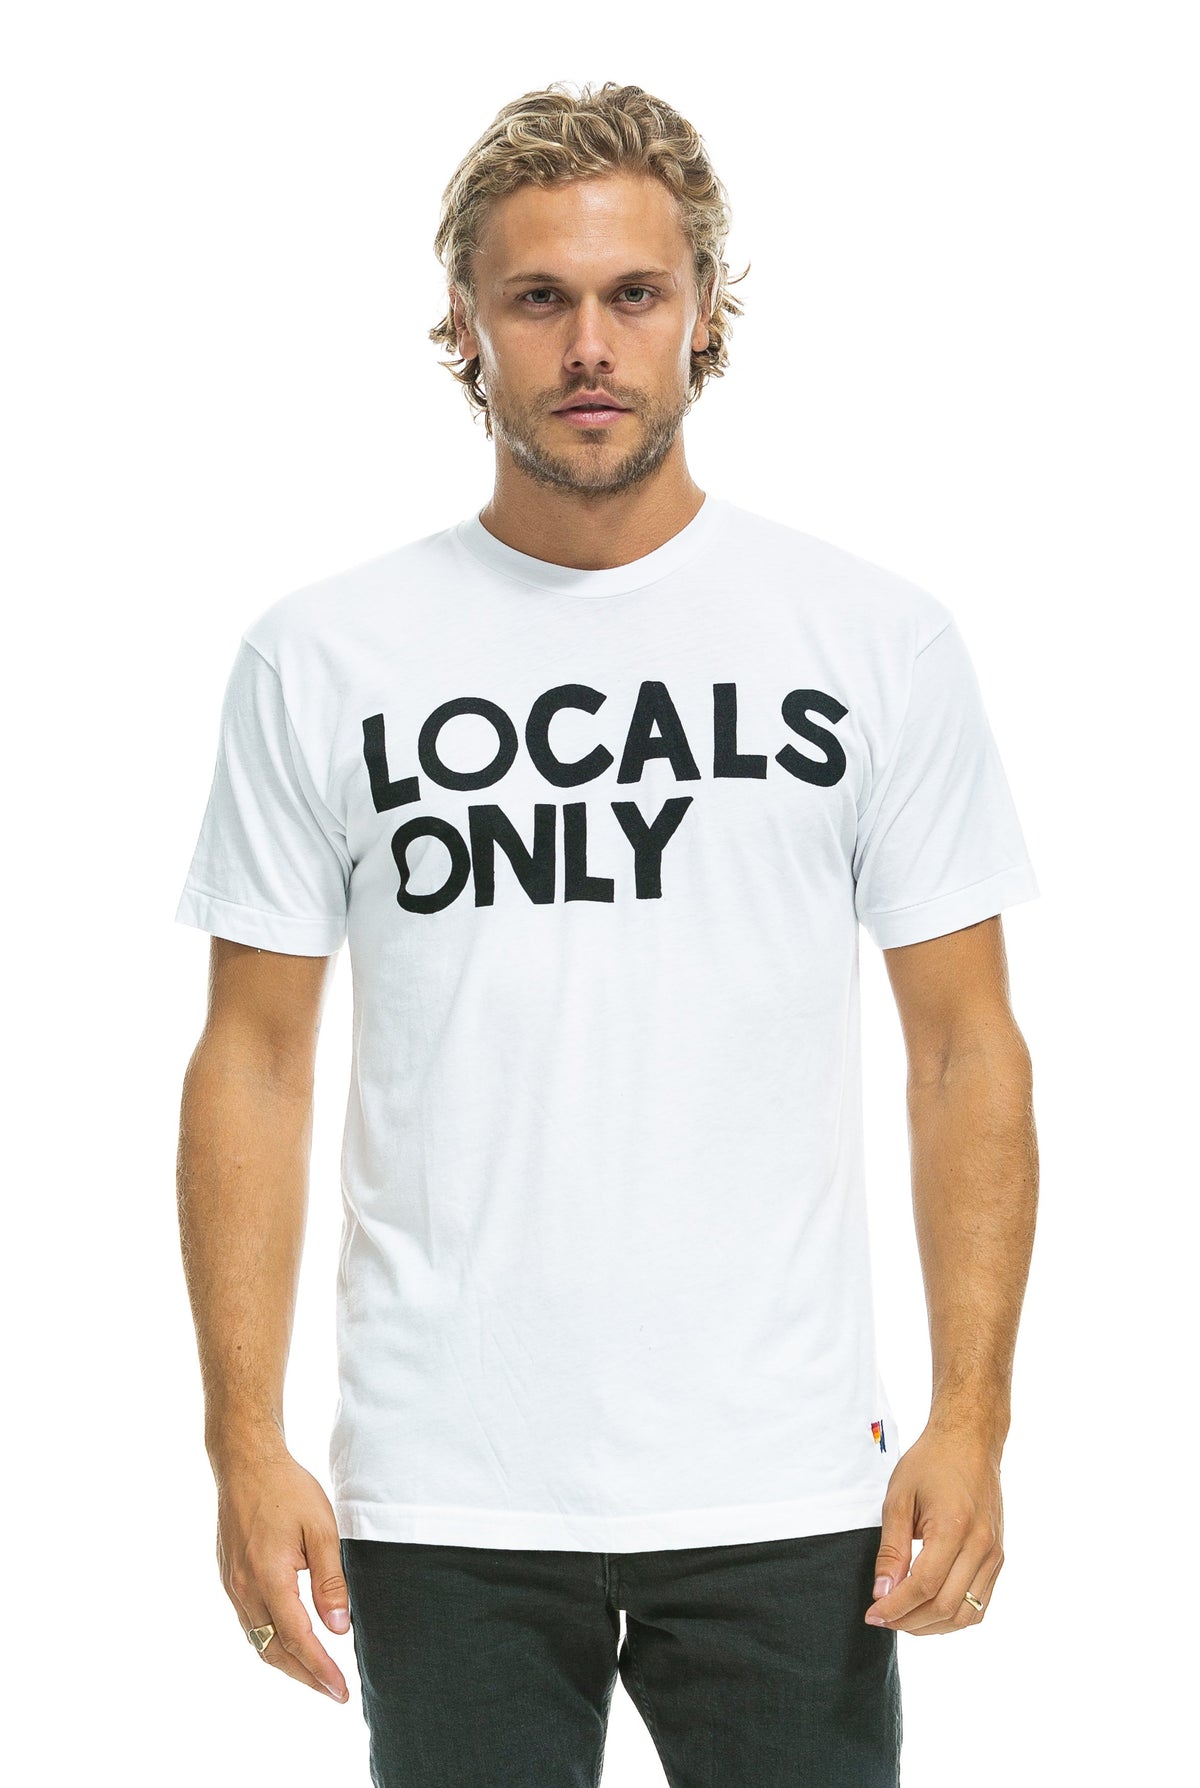 LOCALS ONLY TEE - WHITE Shirts &amp; Tops Aviator Nation 